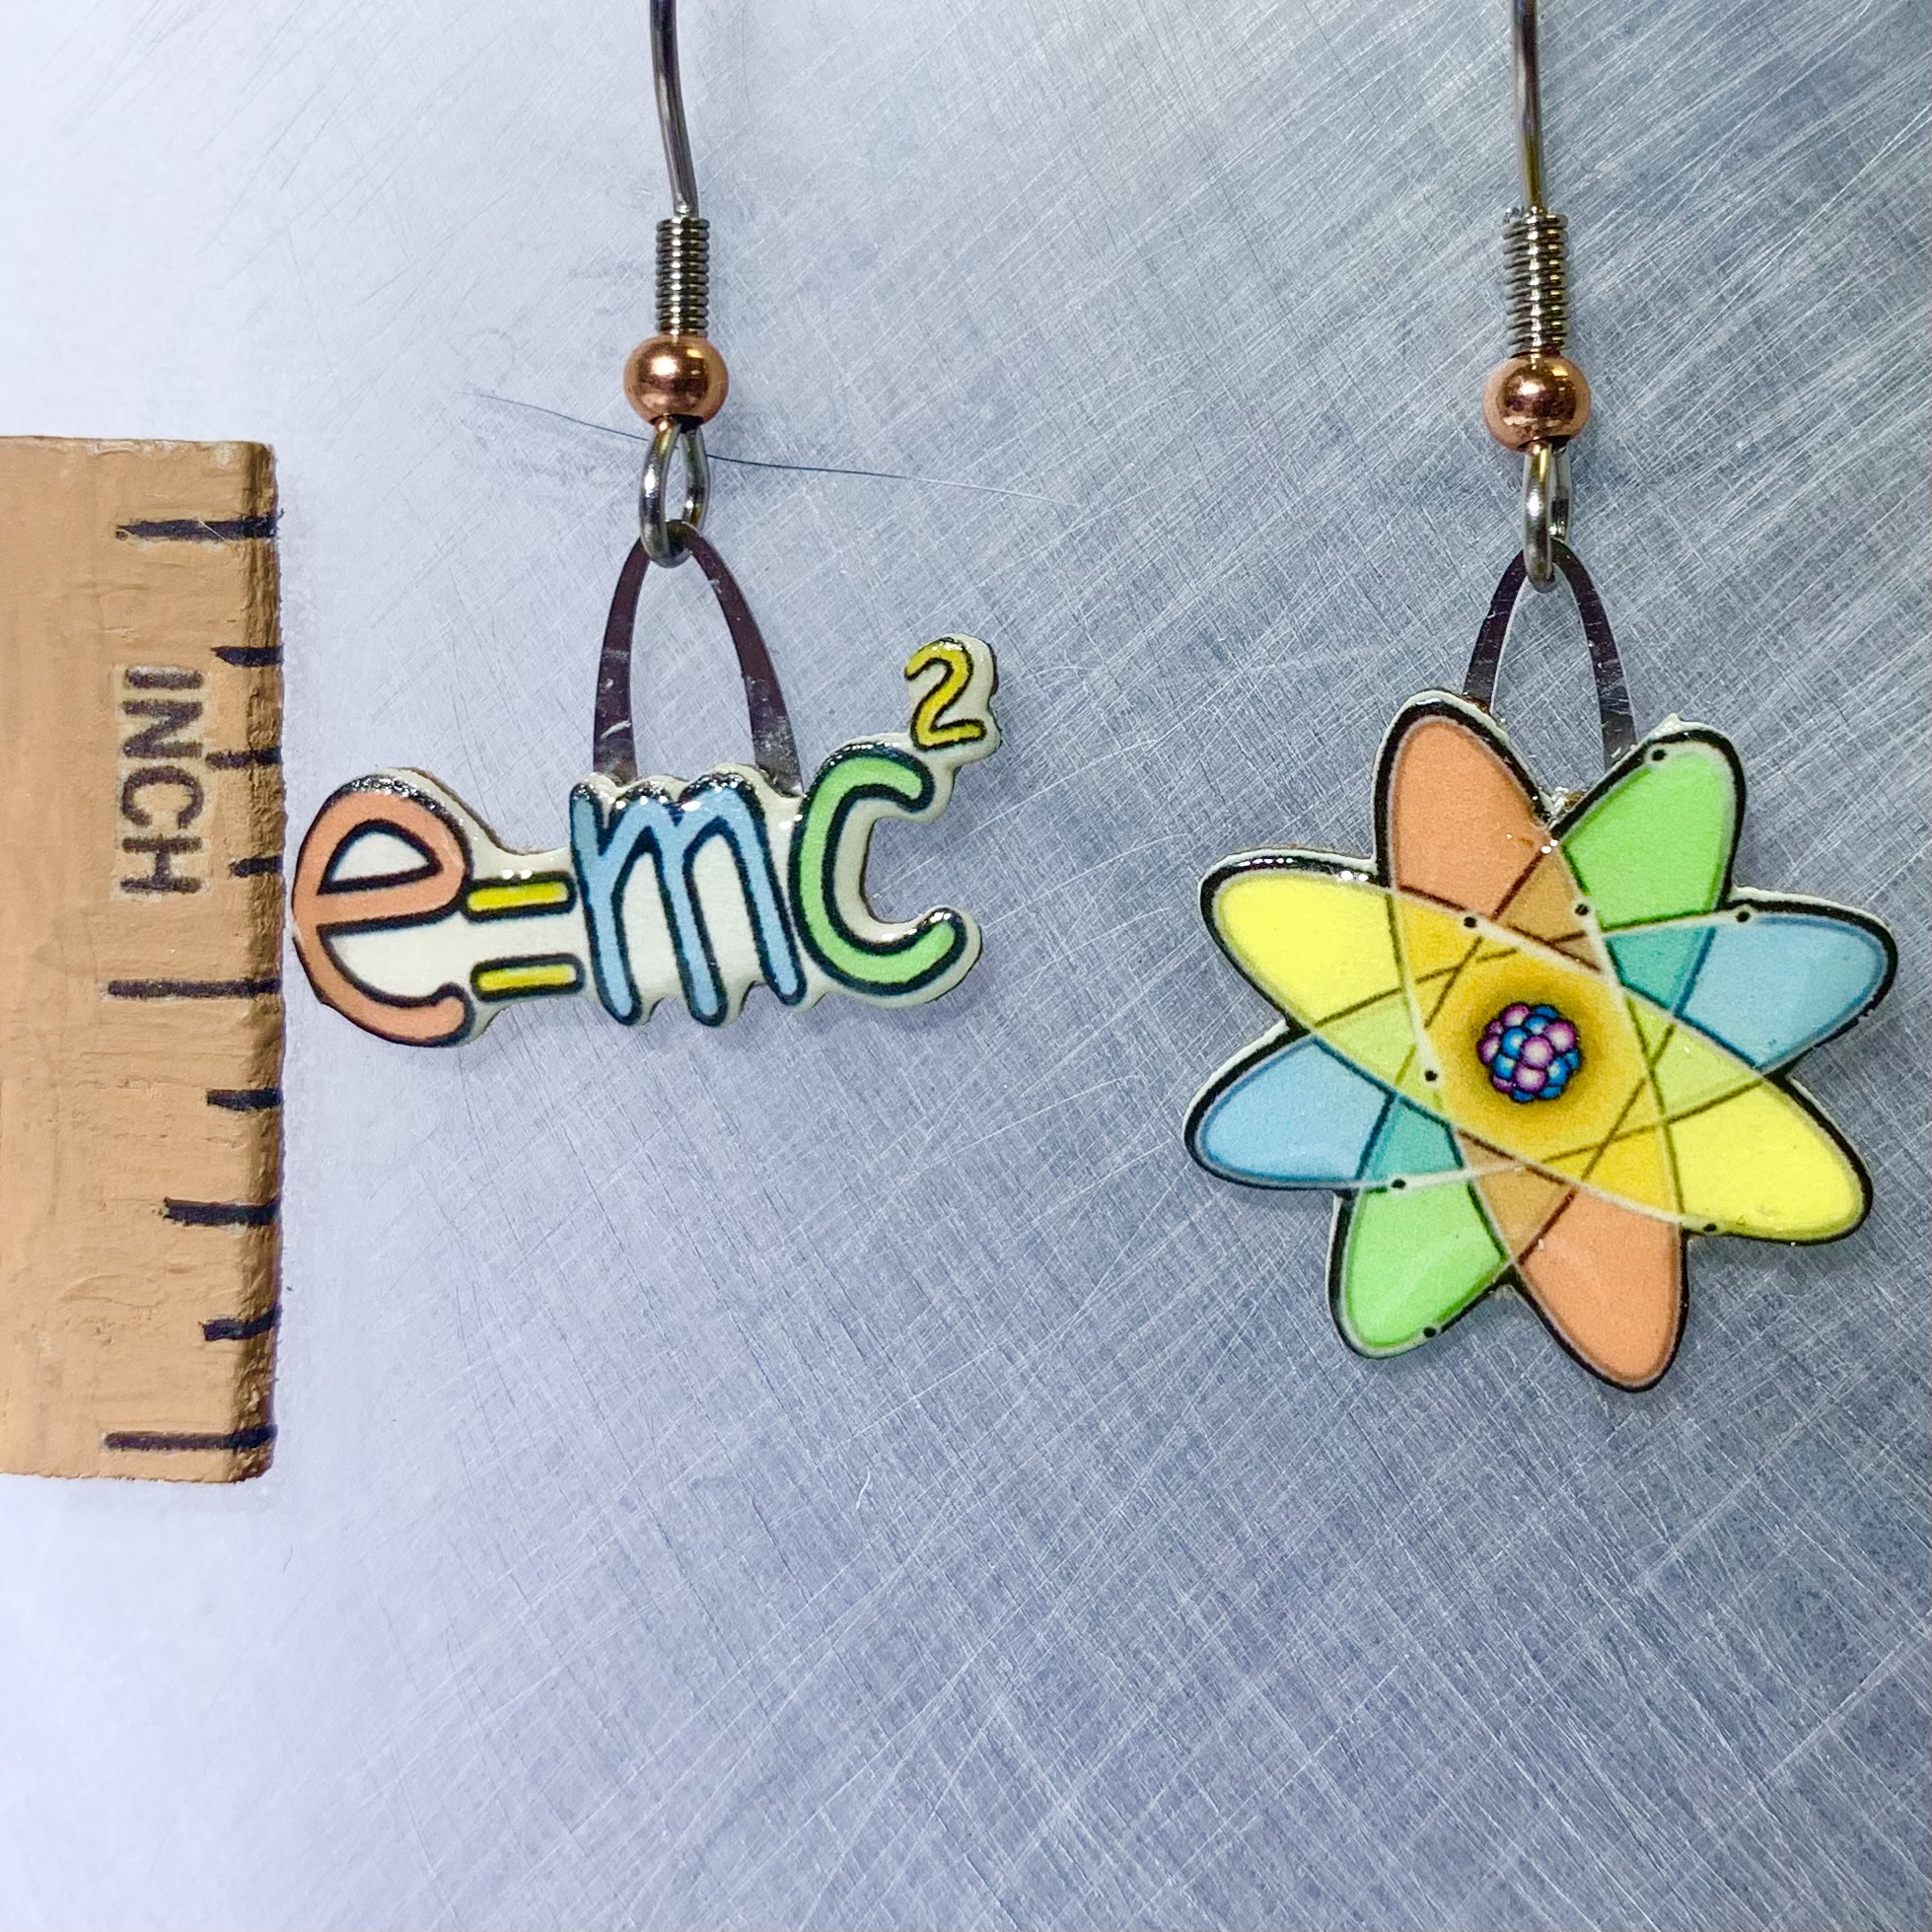 Picture shown is of 1 inch tall pair of earrings of Nuclear Science (Atom).